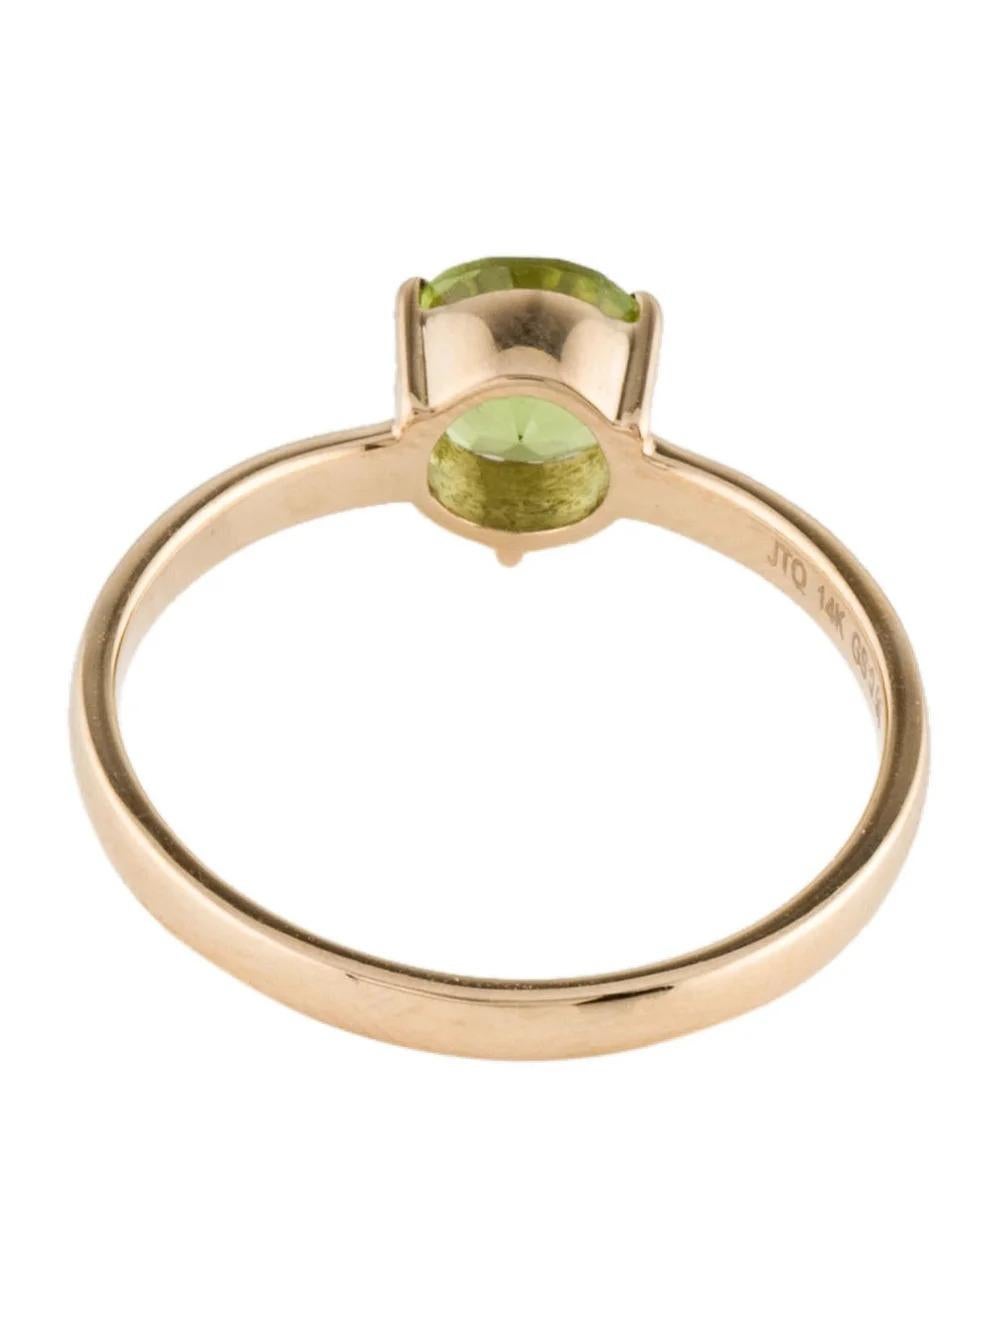 Vintage 14K Peridot Solitaire Cocktail Ring, Size 7 - Green Gemstone Jewelry In New Condition For Sale In Holtsville, NY